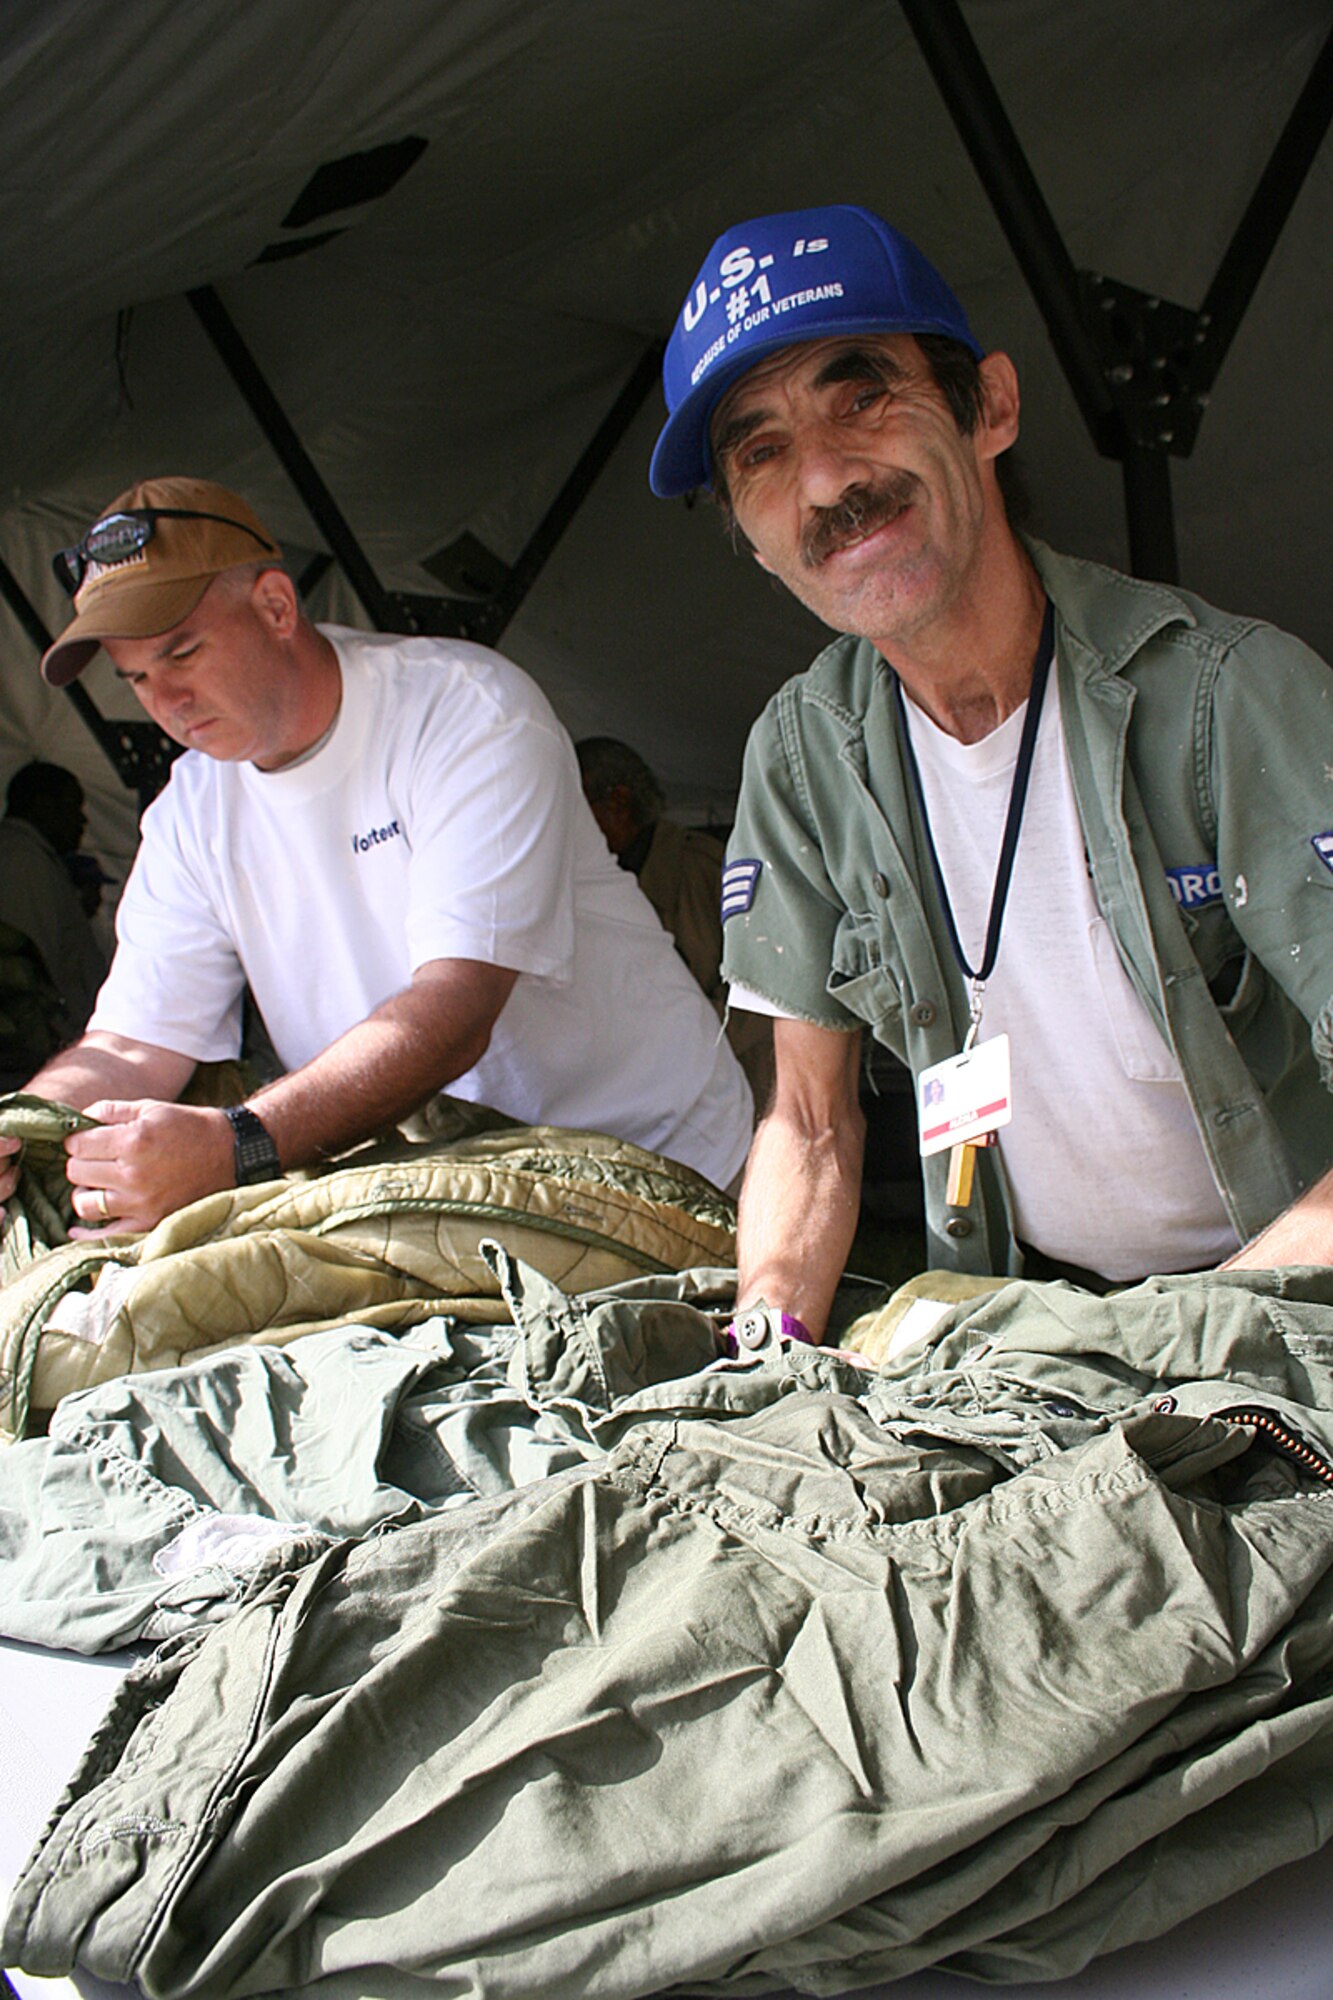 A six year Vietnam era veteran proudly displays his status as a veteran by his hat, "US is #1 because of our veterans." A member from MAFB helps others find the size jacket they are looking for. Photo by Petty Officer 2nd Class Troy Karr